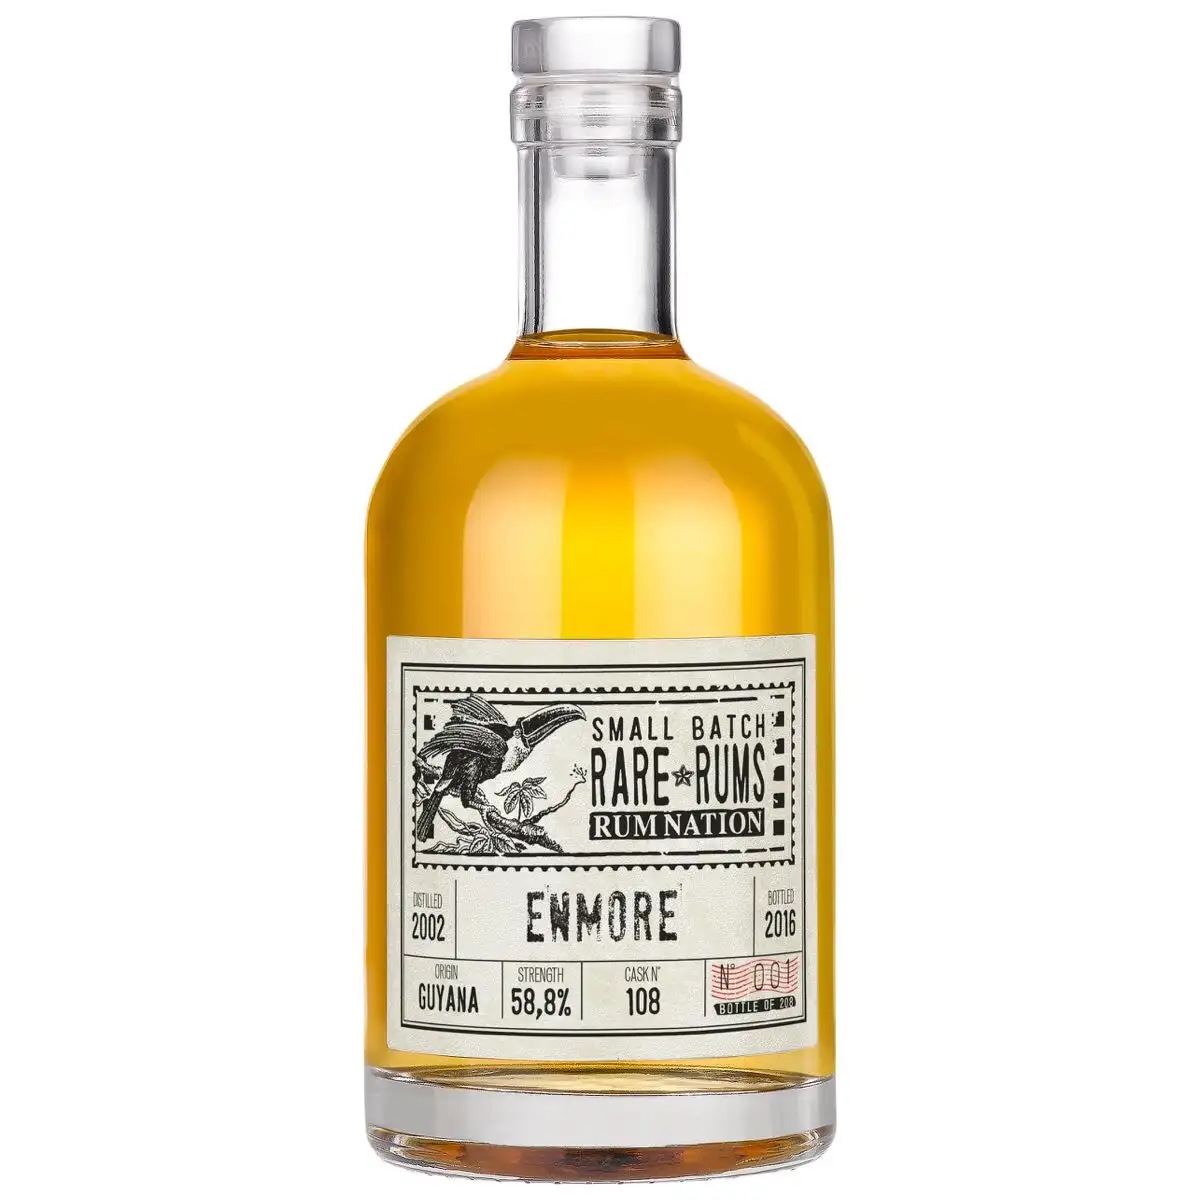 Image of the front of the bottle of the rum Small Batch Rare Rums